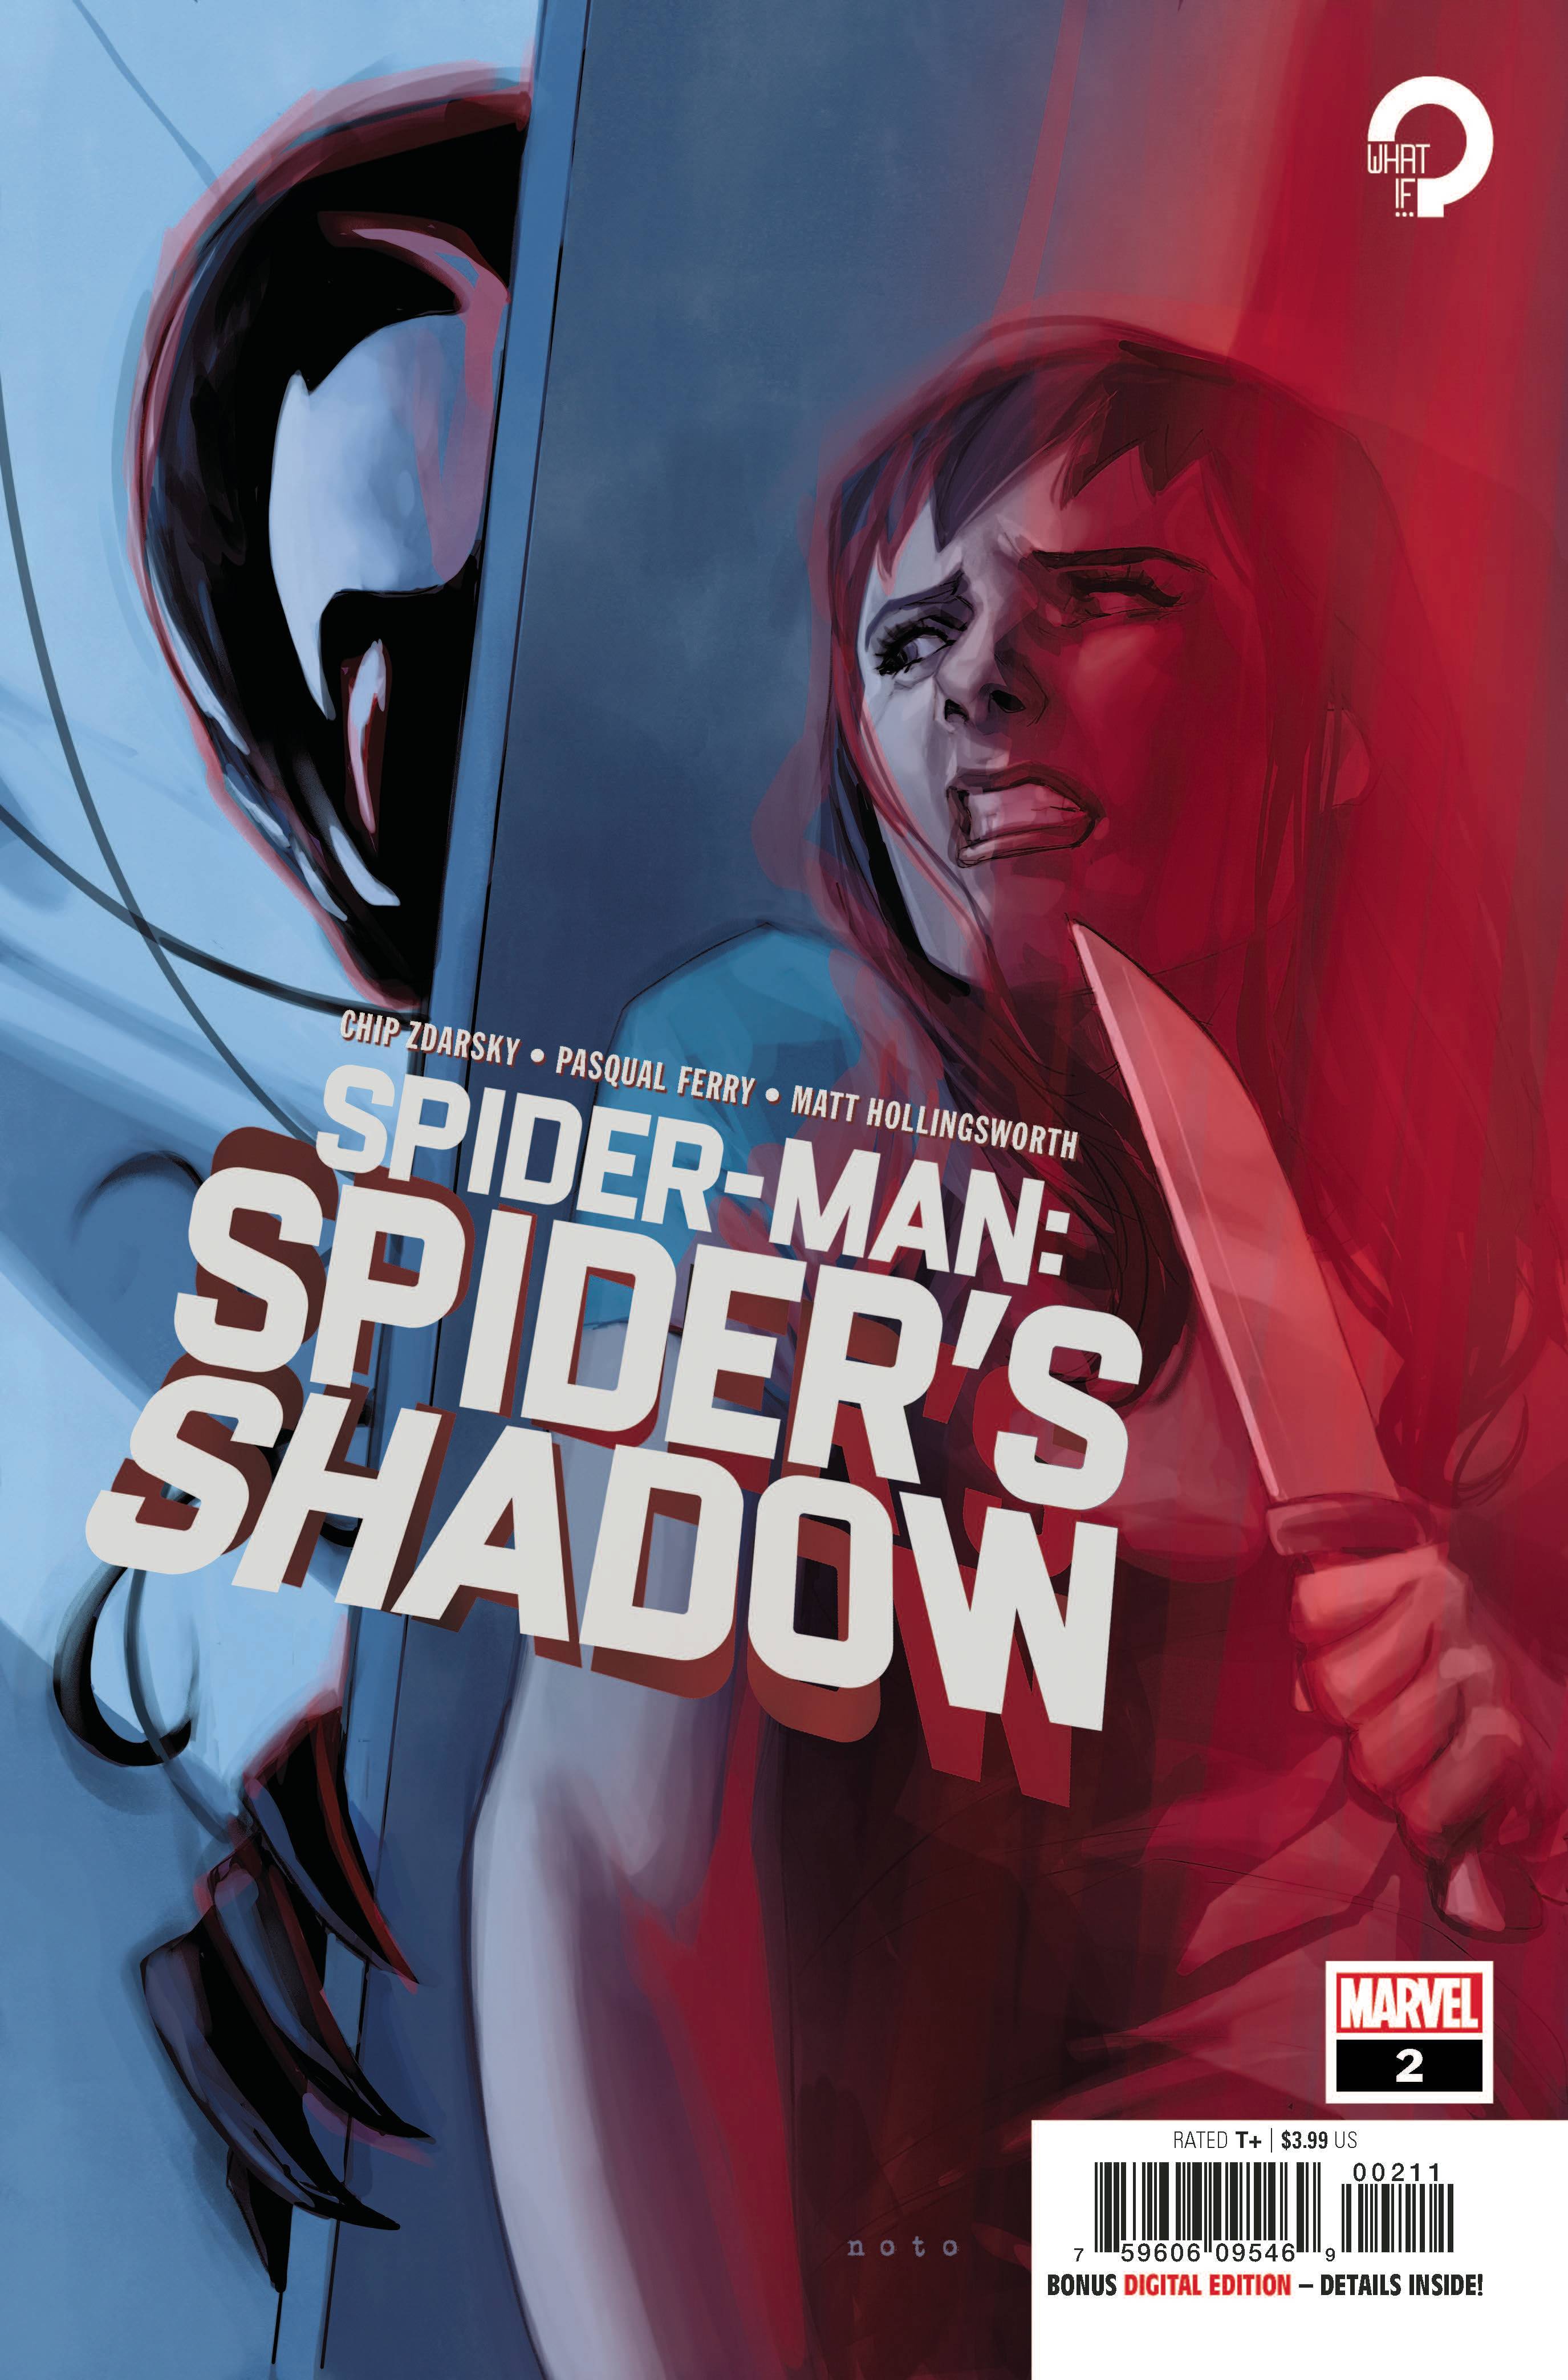 Spider-Man Spiders Shadow #2 (Of 4)